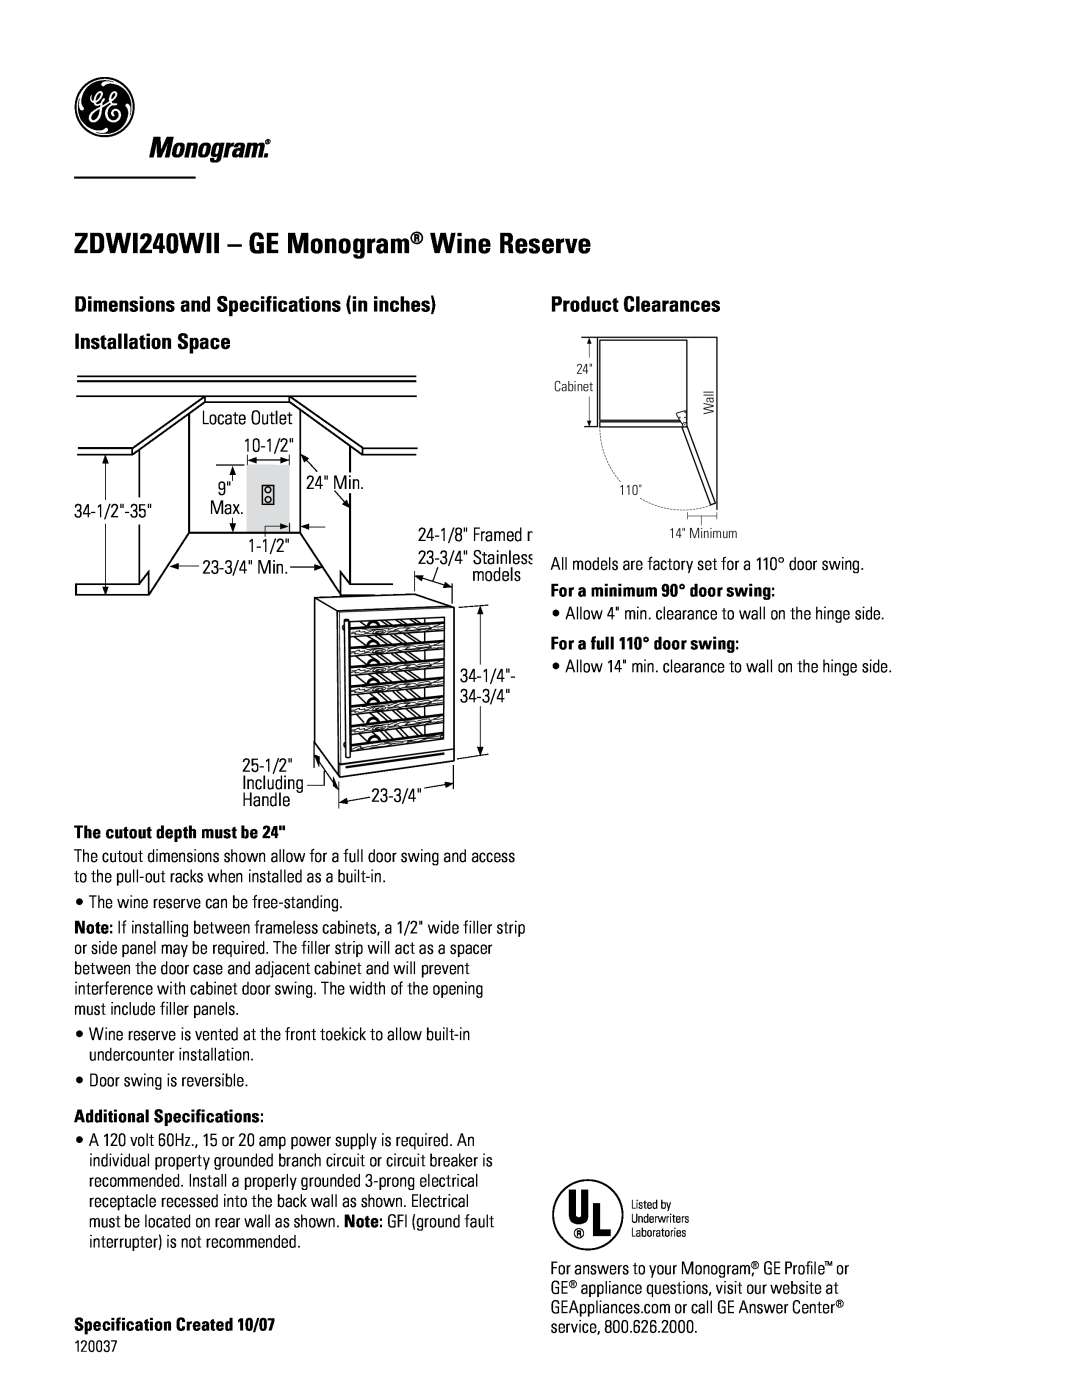 GE dimensions ZDWI240WII - GE Monogram Wine Reserve, Product Clearances 